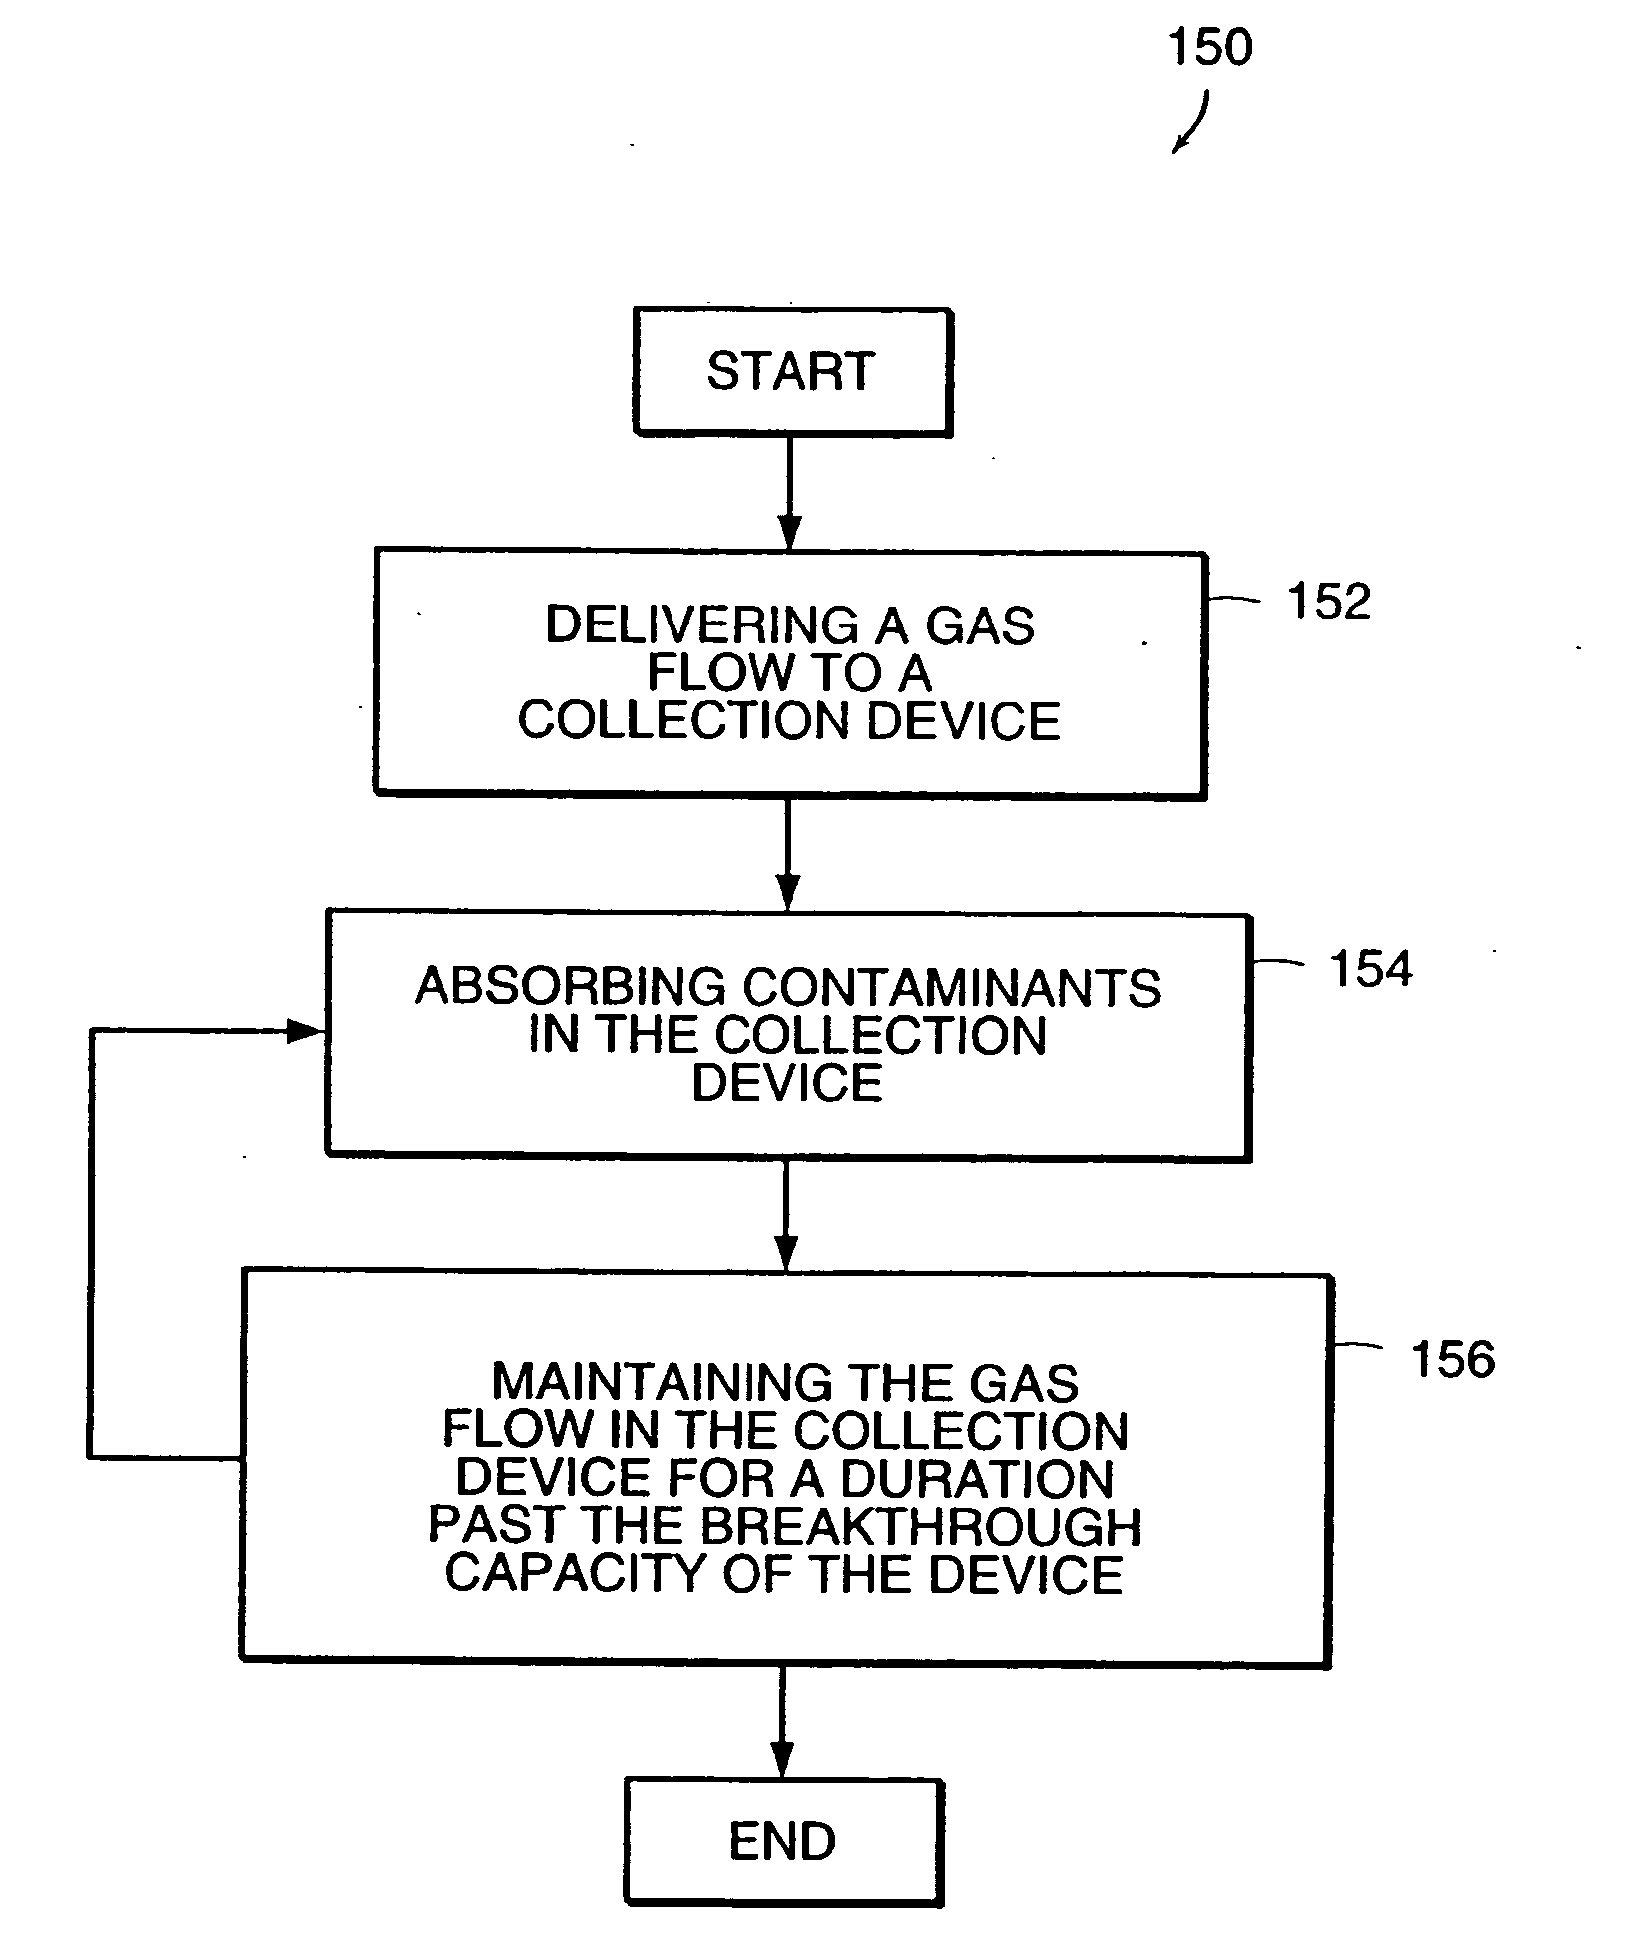 System and method of monitoring contamination